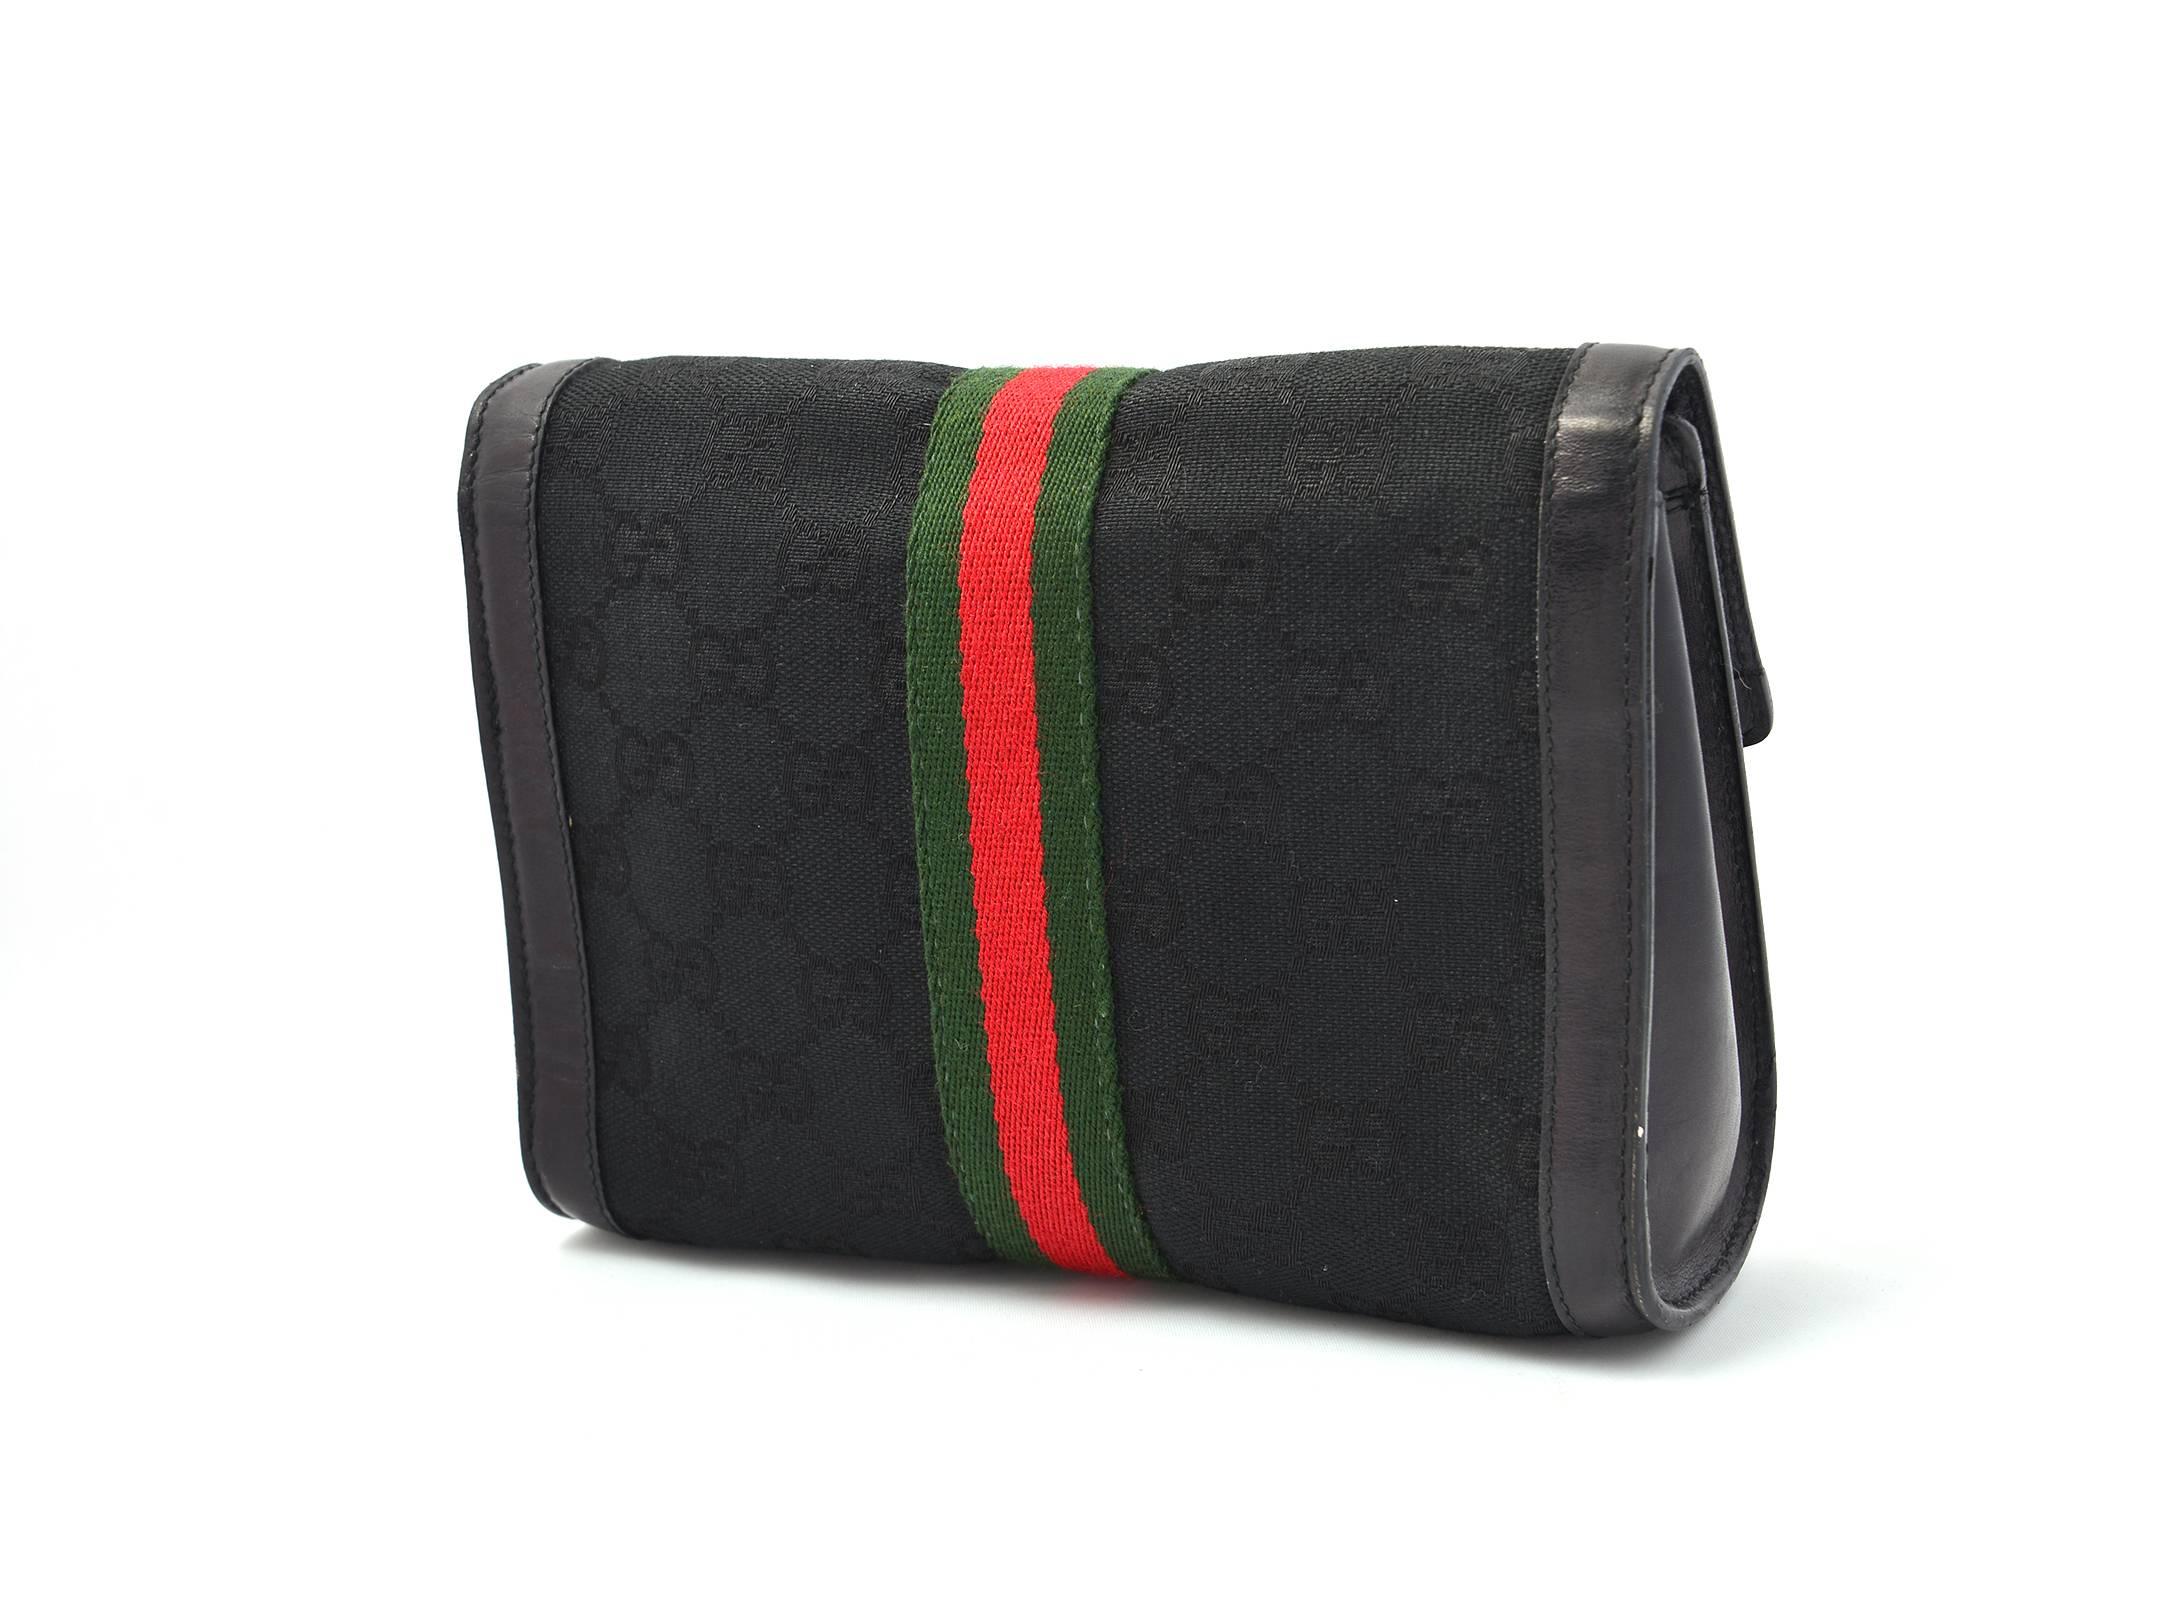 1980s Gucci Black Canvas and Leather Clutch from the 